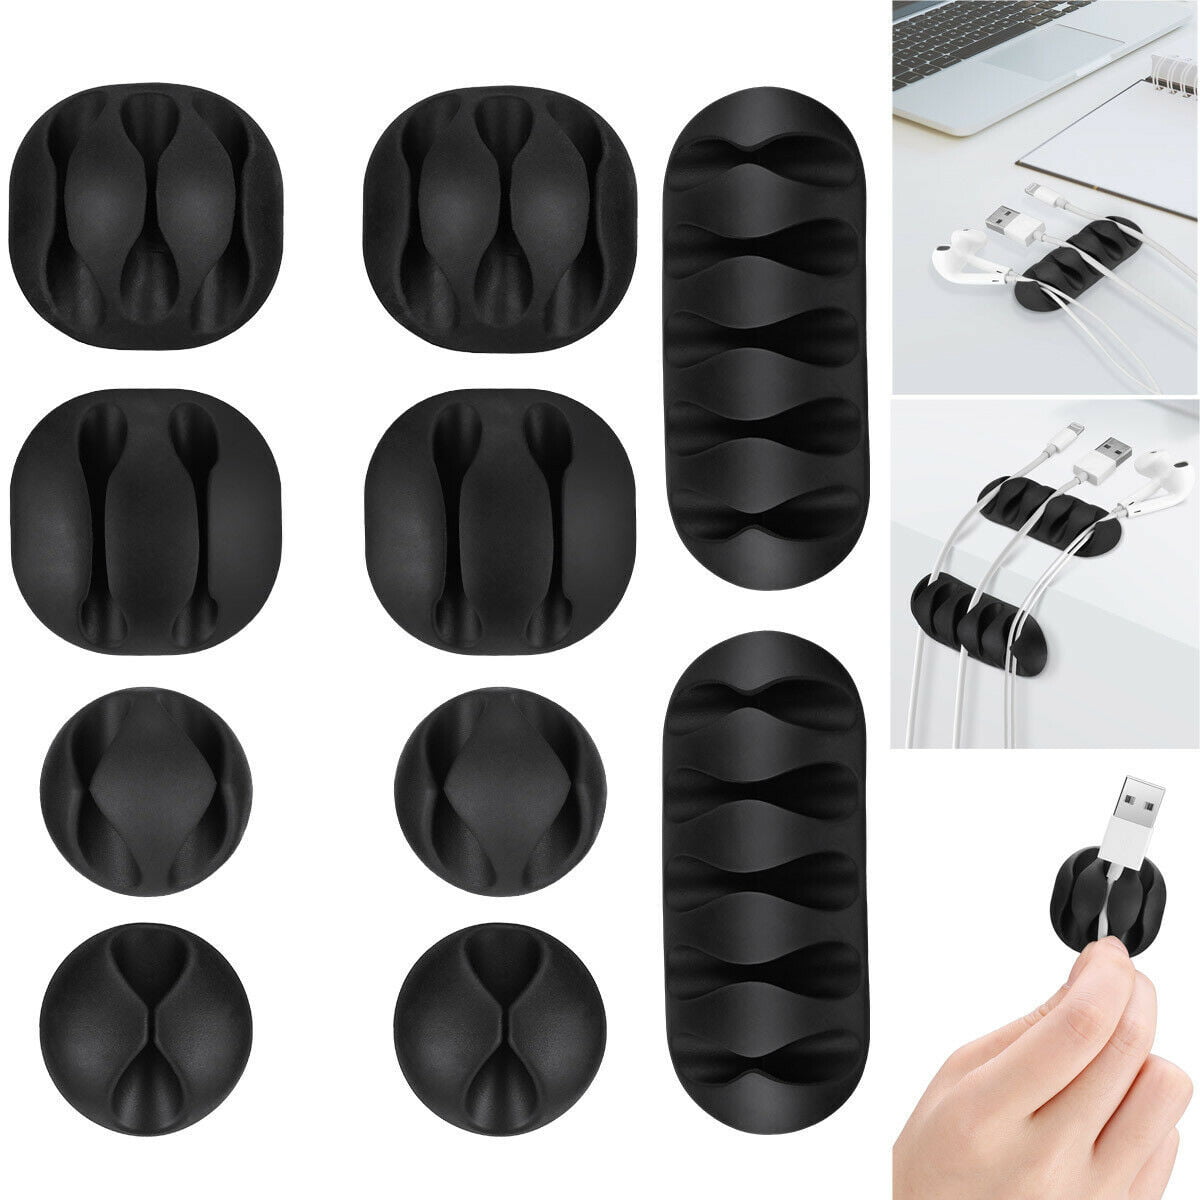 Wall Desktop Cable Holder Clips for Your Phone 10 PCS Single Channel Cable Management Clips Adhesive Wire Cord Organizer Peyou® 10 PCS Double Channels Charging Cable or Mouse Cord Computer Tablet Cable Management Clips 